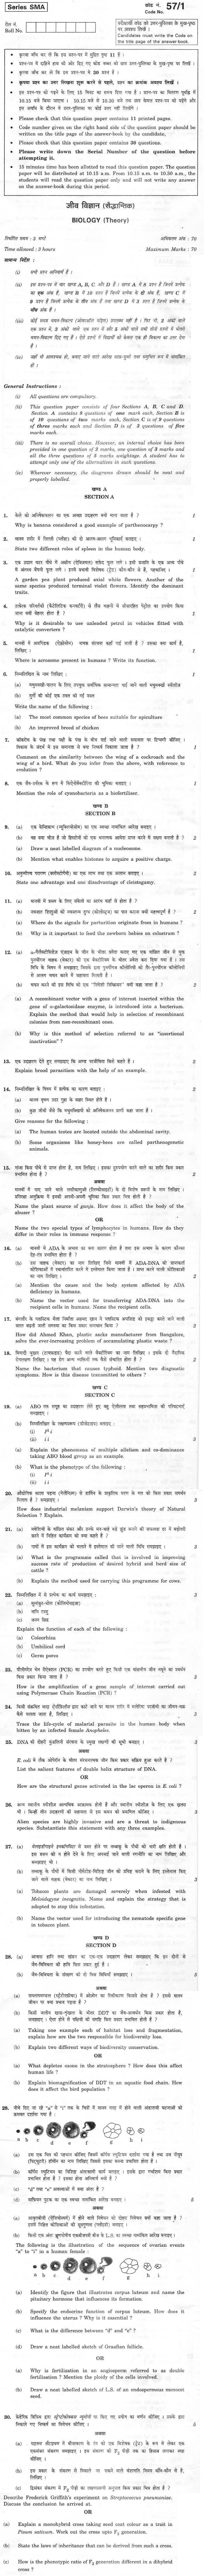 CBSE Class XII Previous Year Question Paper 2012 Biology